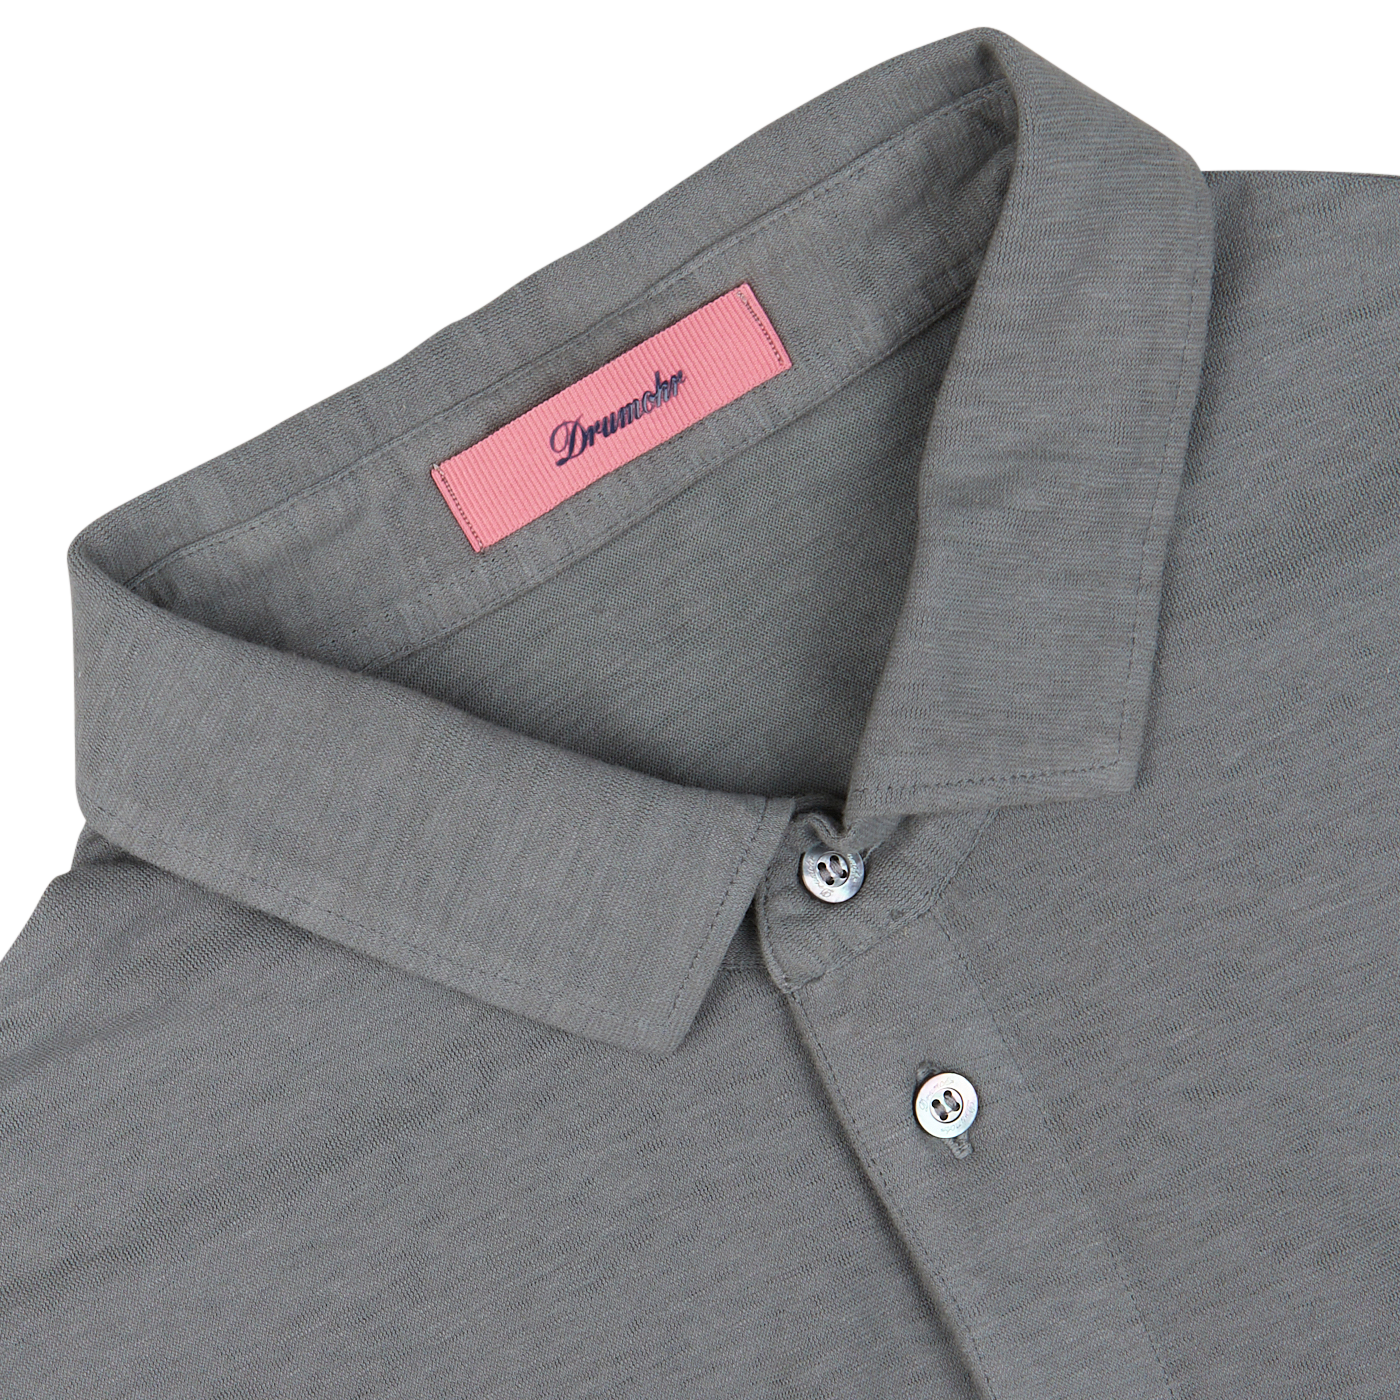 Close-up of a Drumohr steel grey cotton linen polo shirt collar with a brand label and button detail.